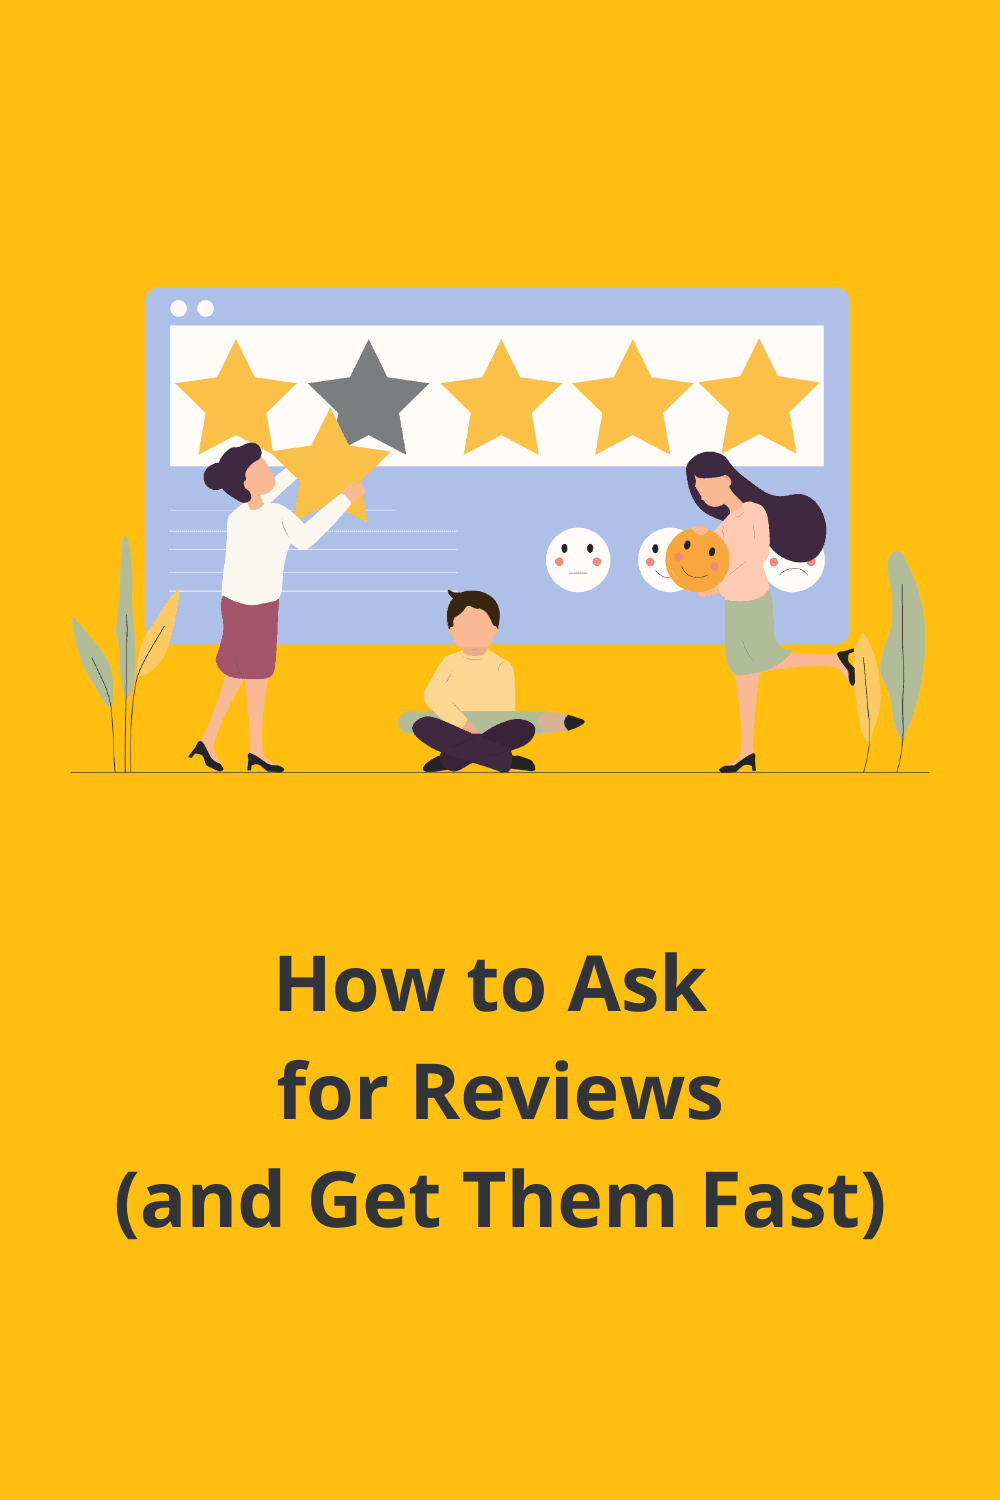 Reviews can have a huge impact on your business. If you don’t already have a solid review presence, it’s time to get serious about building one. via @scopedesign